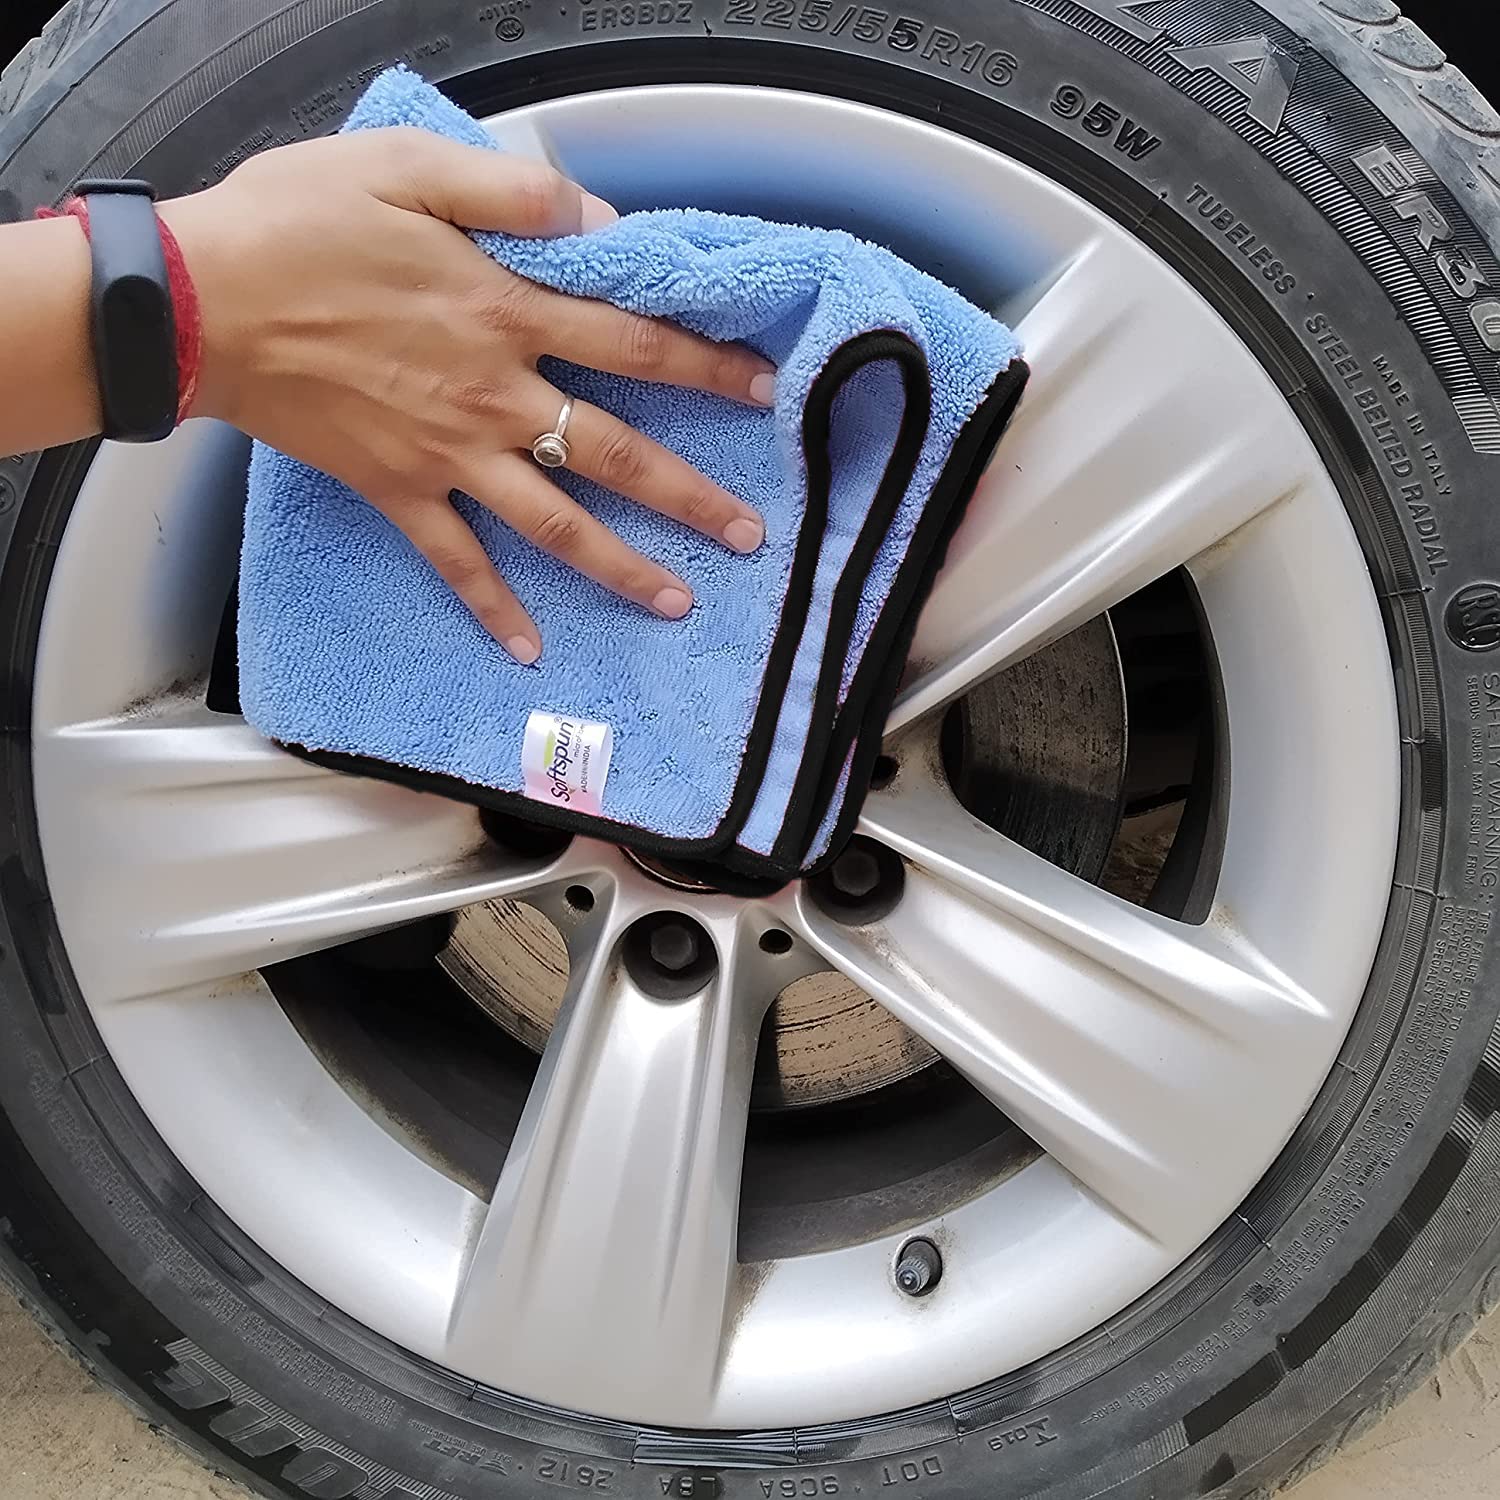 SOFTSPUN Microfiber High, Loop Silk Banded Edges,Car Cleaning Cloths, 40x40cms 4pcs Towel Set 380 GSM Highly Absorbent, Multi-Purpose Cleaning Cloth